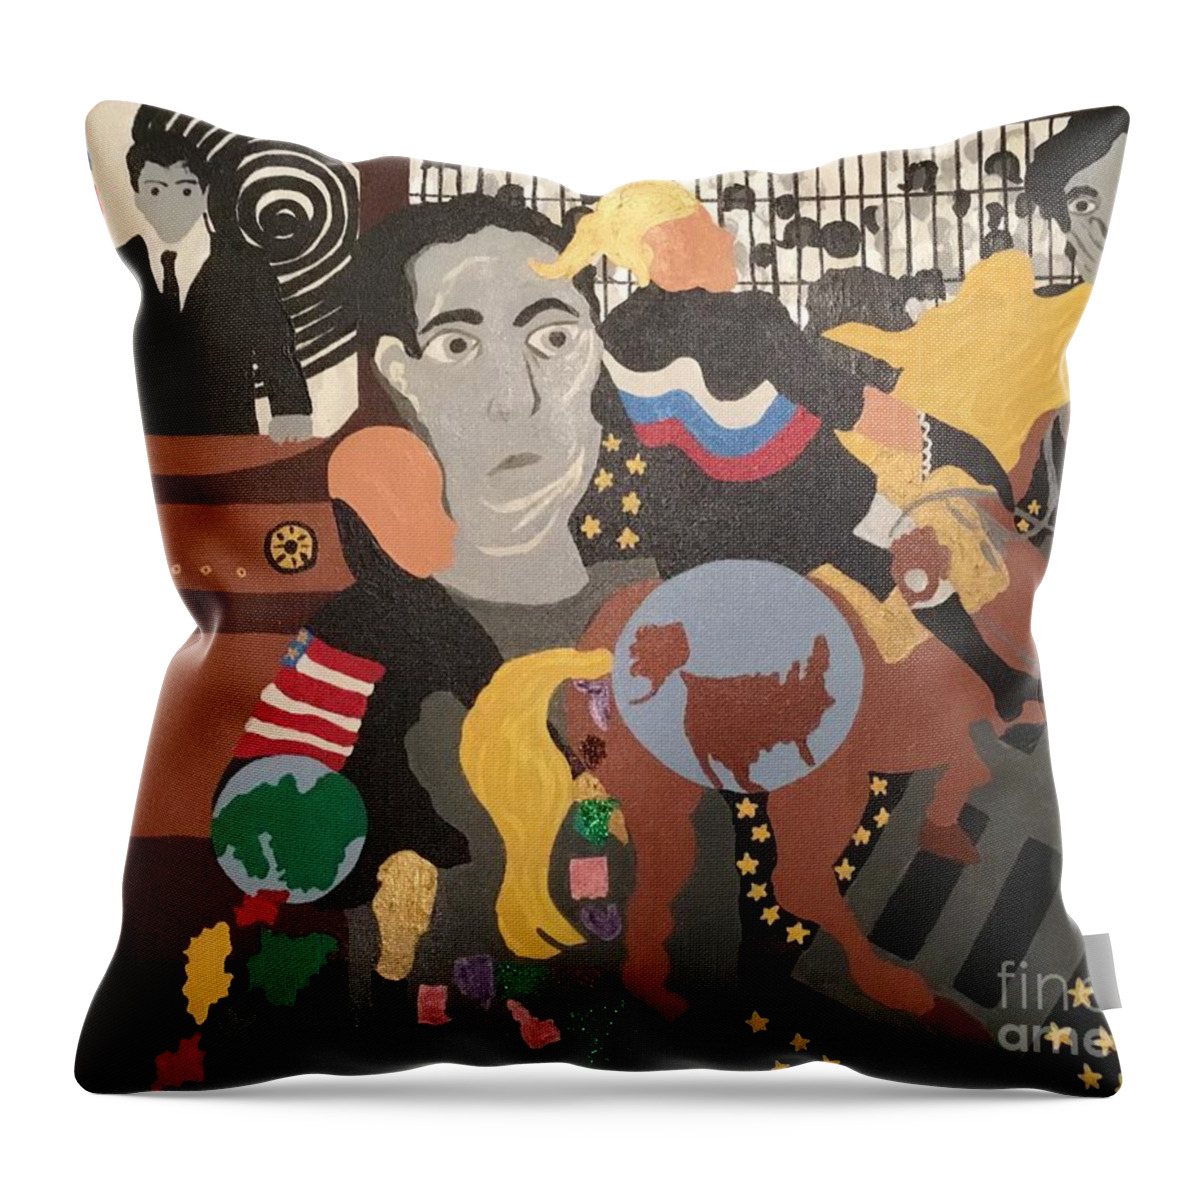 Trump. Putin. Twilight Zone Throw Pillow featuring the painting Twilight Zone 2017 by Erika Jean Chamberlin